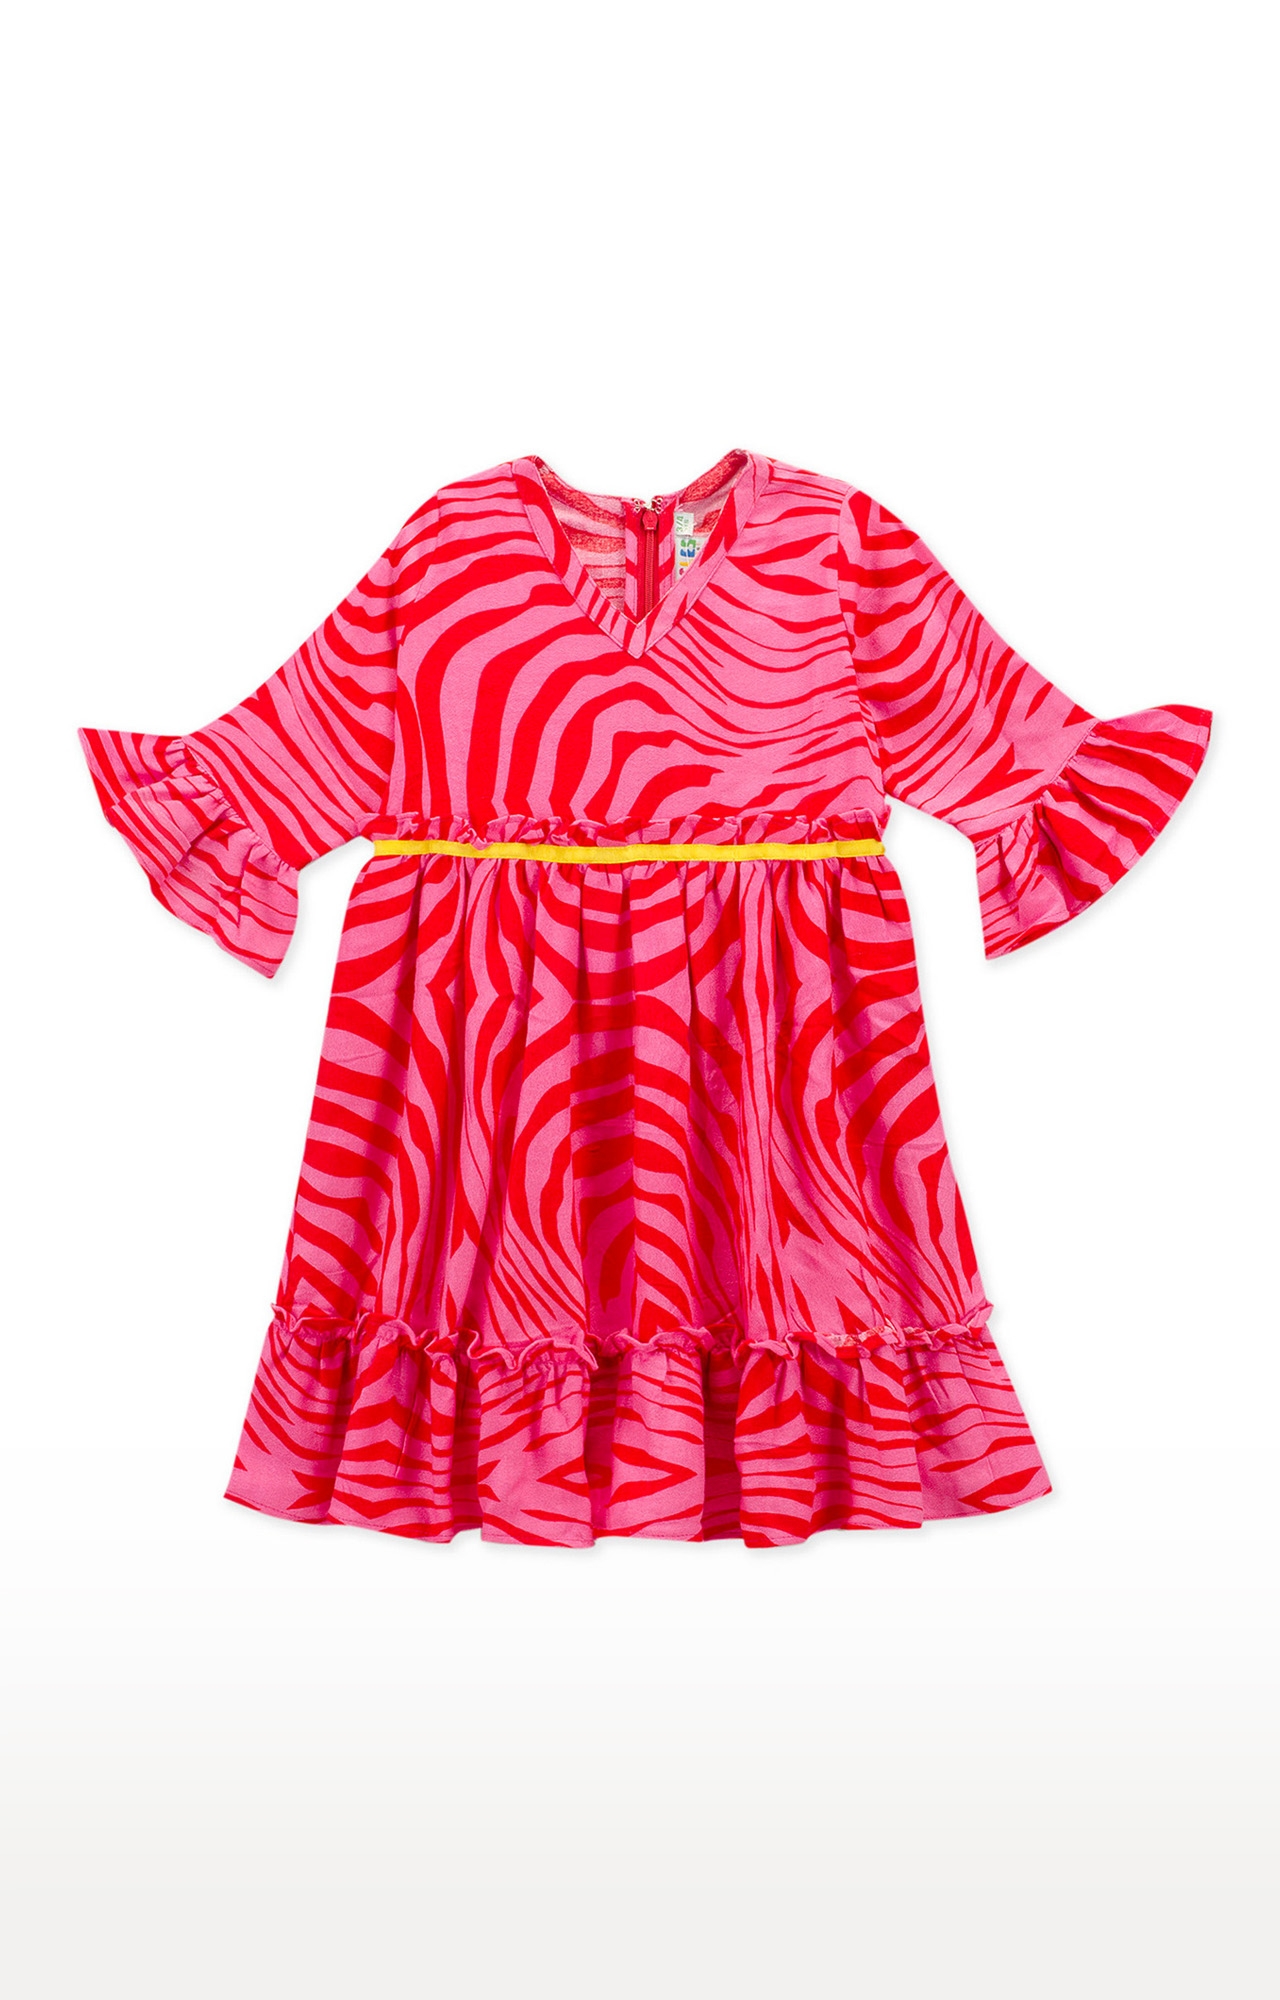 Popsicles Clothing | Popsicles Girls Crepe Waves Dress - Pink and Red (1-2 Years)